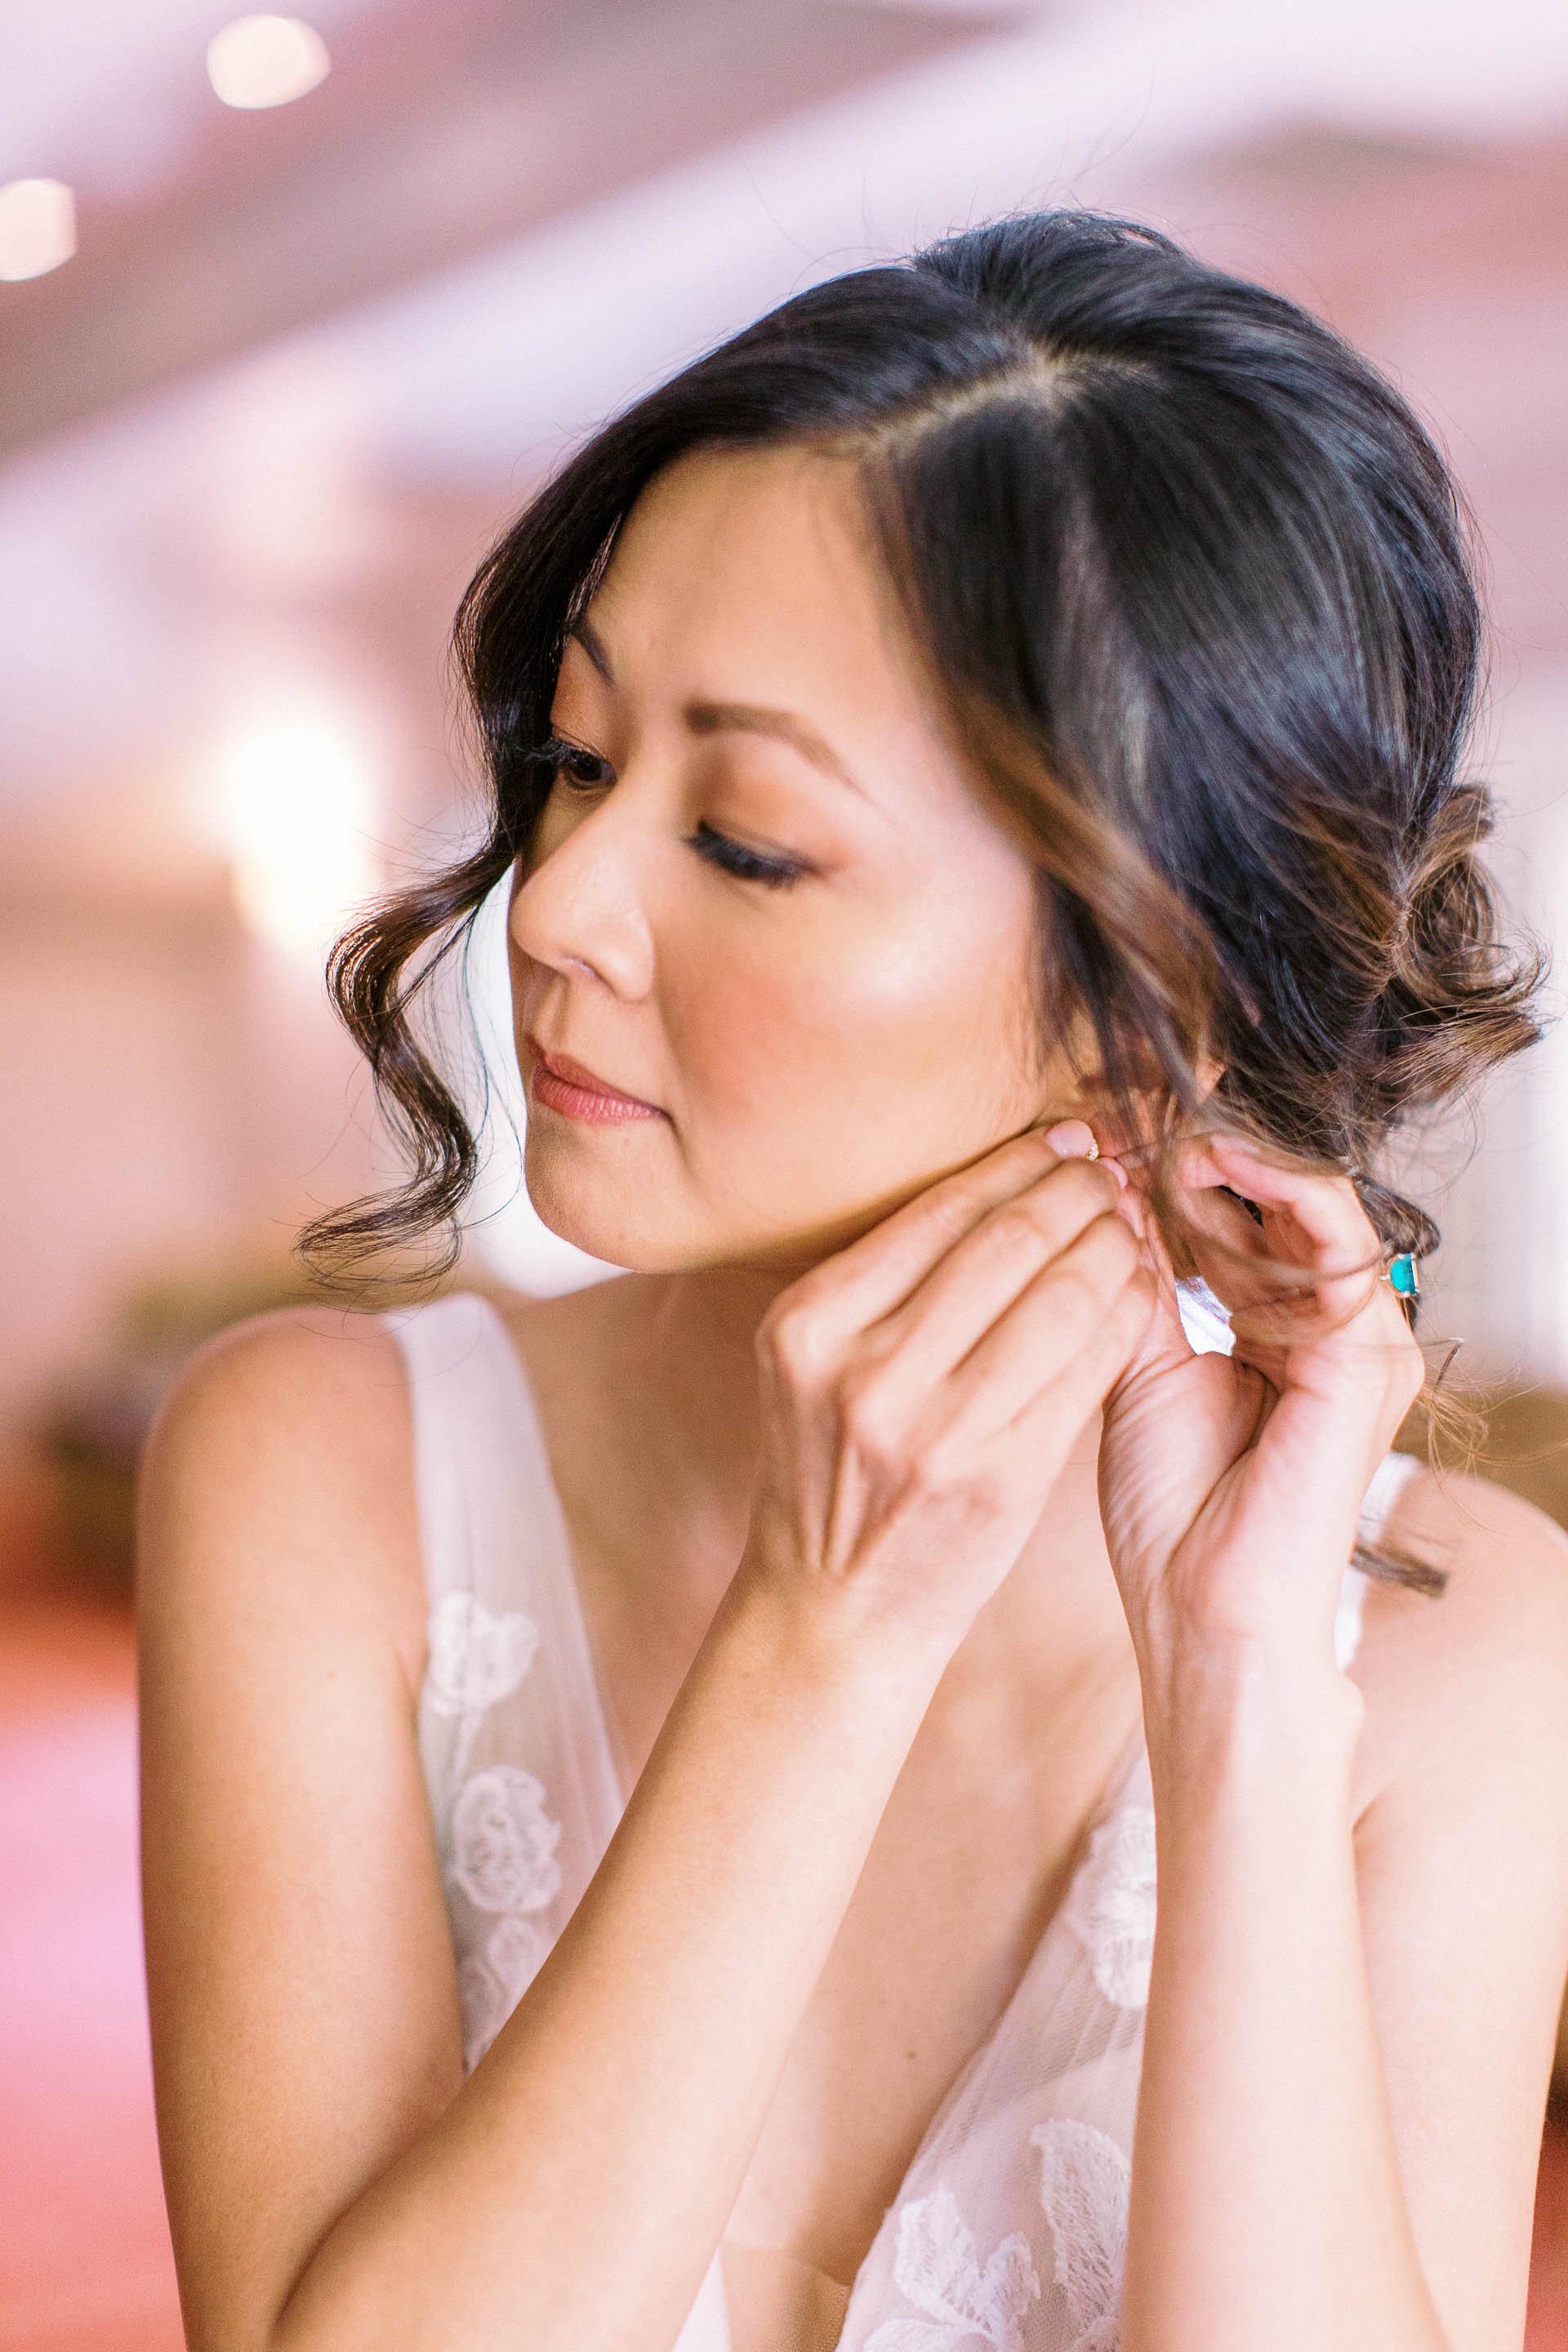 bride putting on earring at wedding